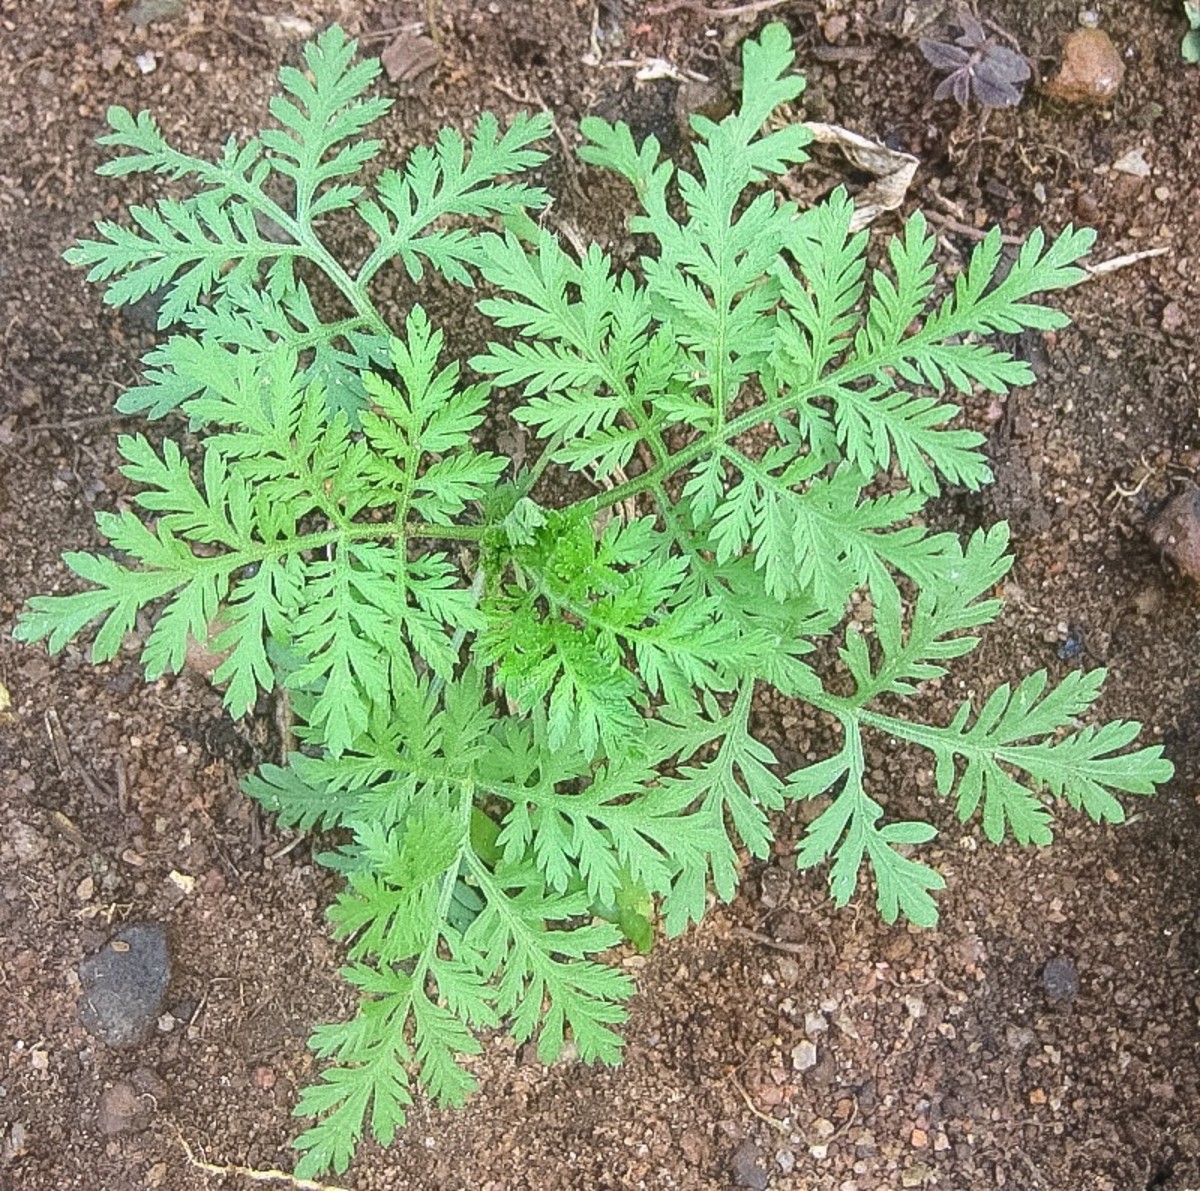 A young sweet wormwood plant